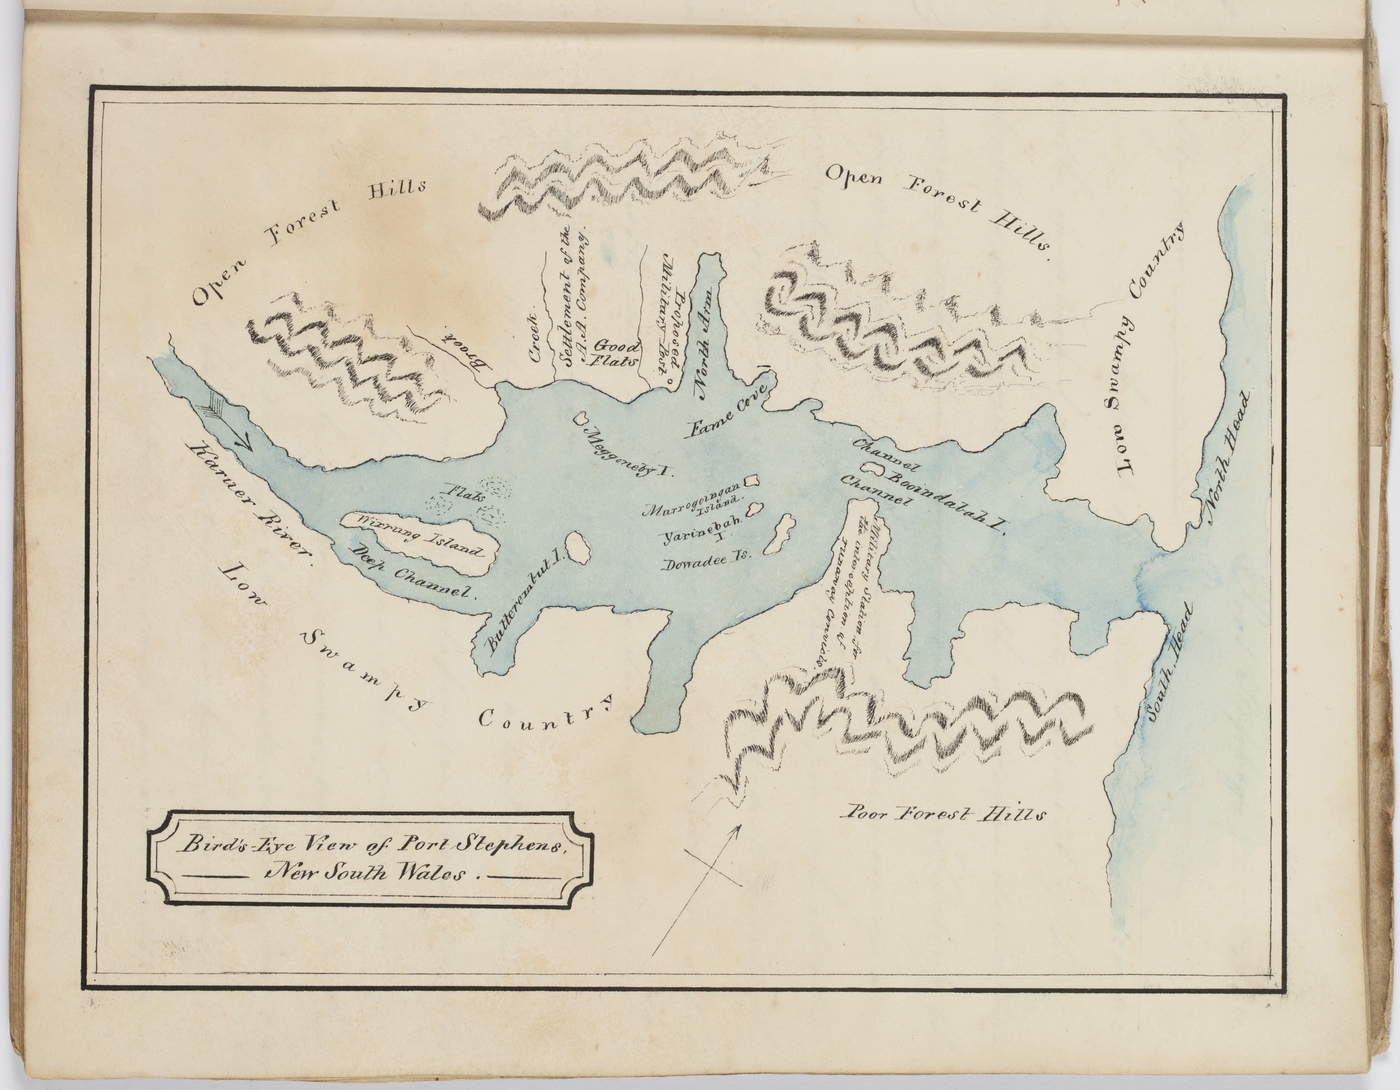 Bird's Eye View of Port Stephens, New South Wales [1826] by H.T. Ebsworth (Courtesy of the State Library of NSW)